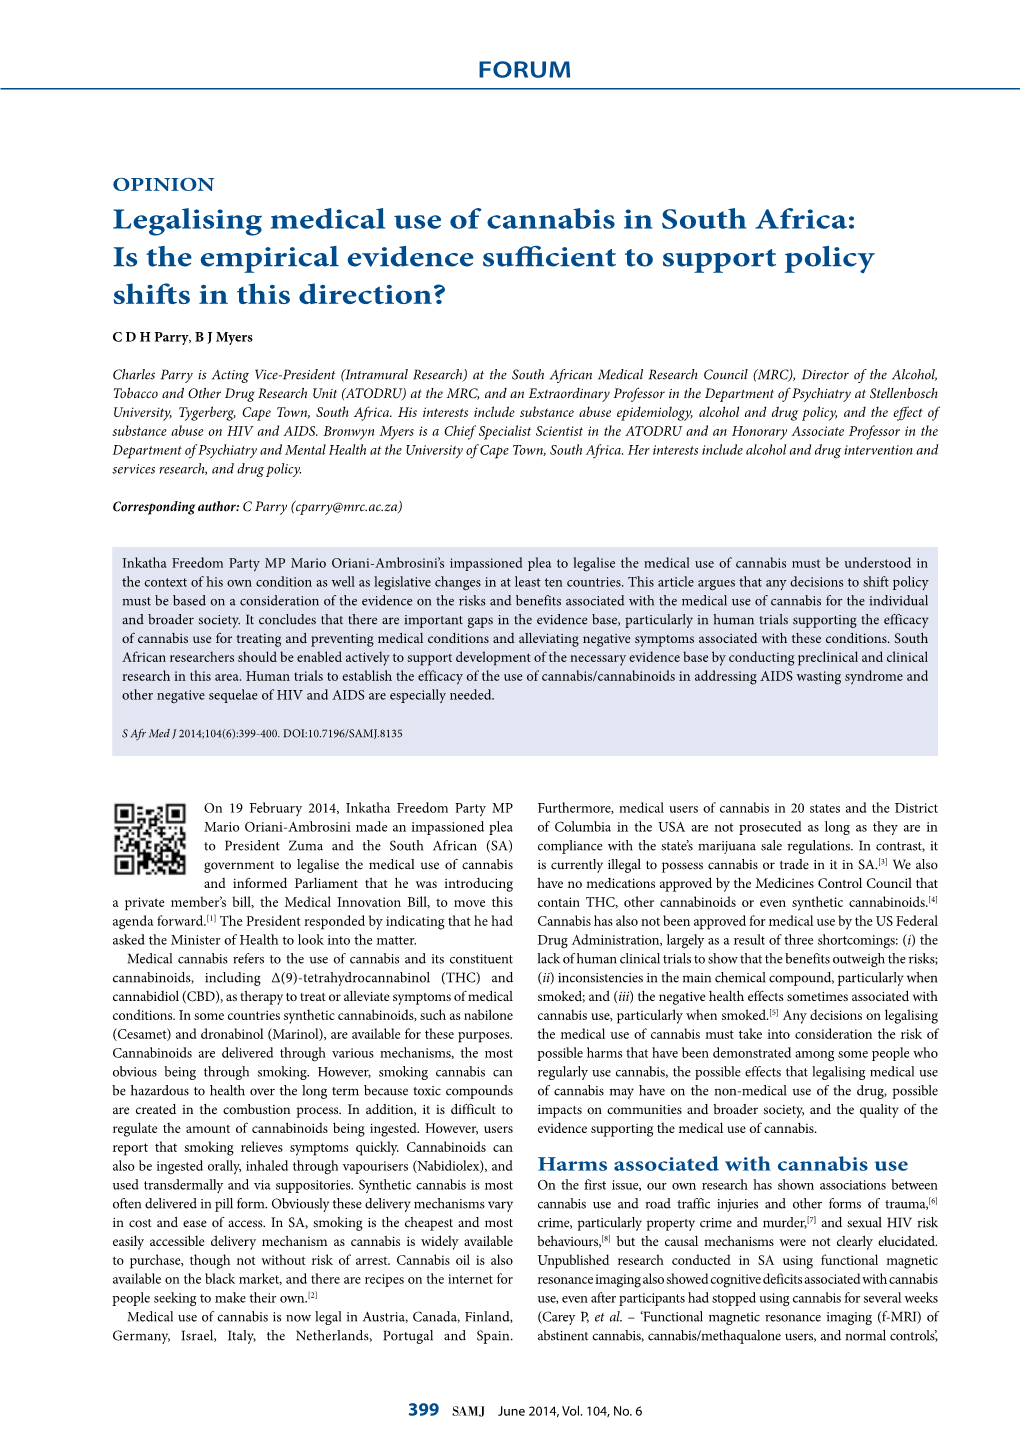 Legalising Medical Use of Cannabis in South Africa: Is the Empirical Evidence Sufficient to Support Policy Shifts in This Direction?